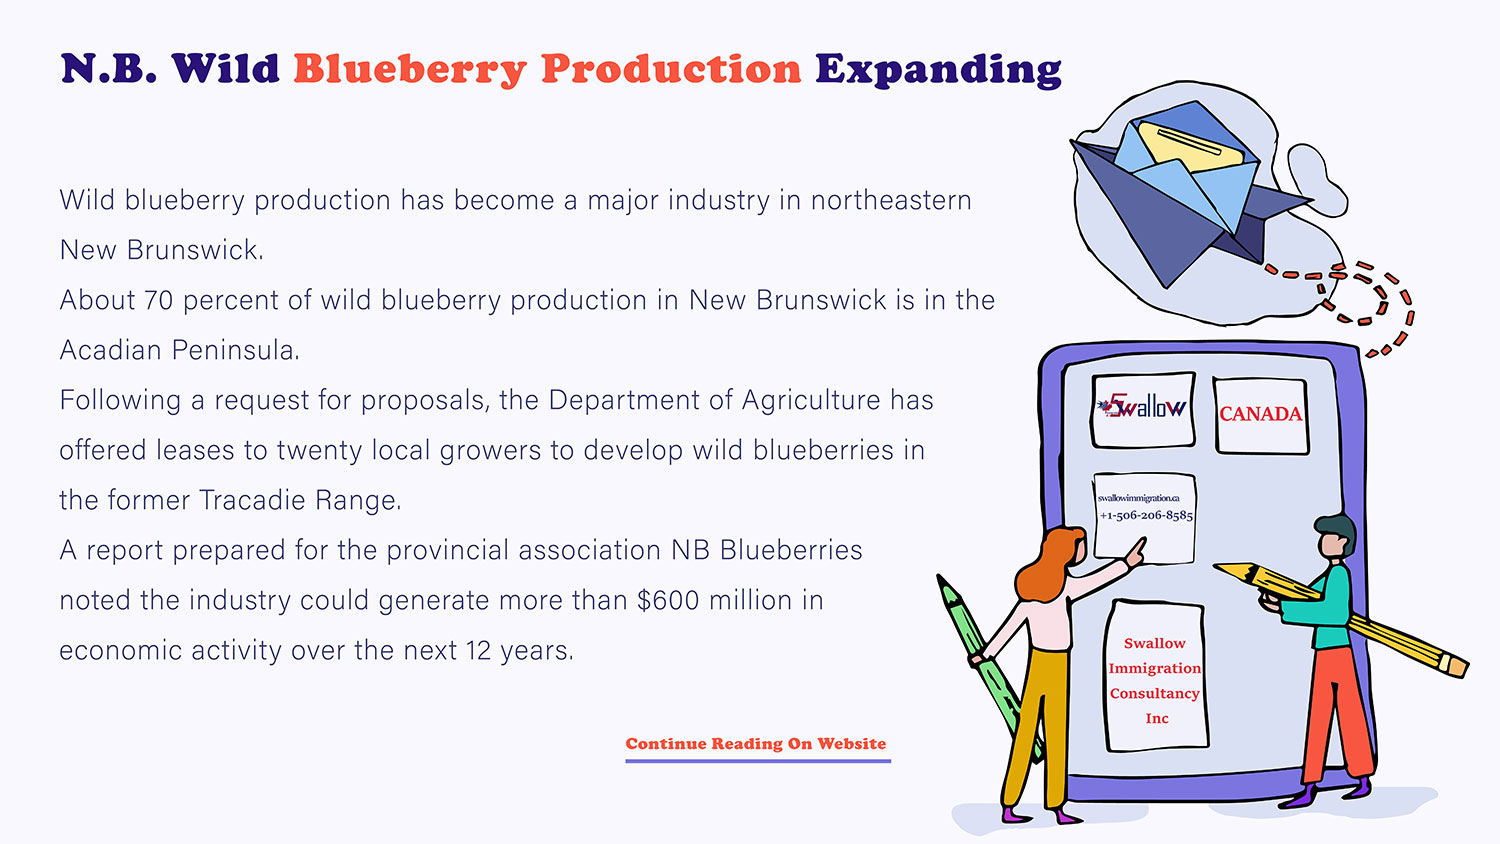 N.B. Wild Blueberry Production Expanding